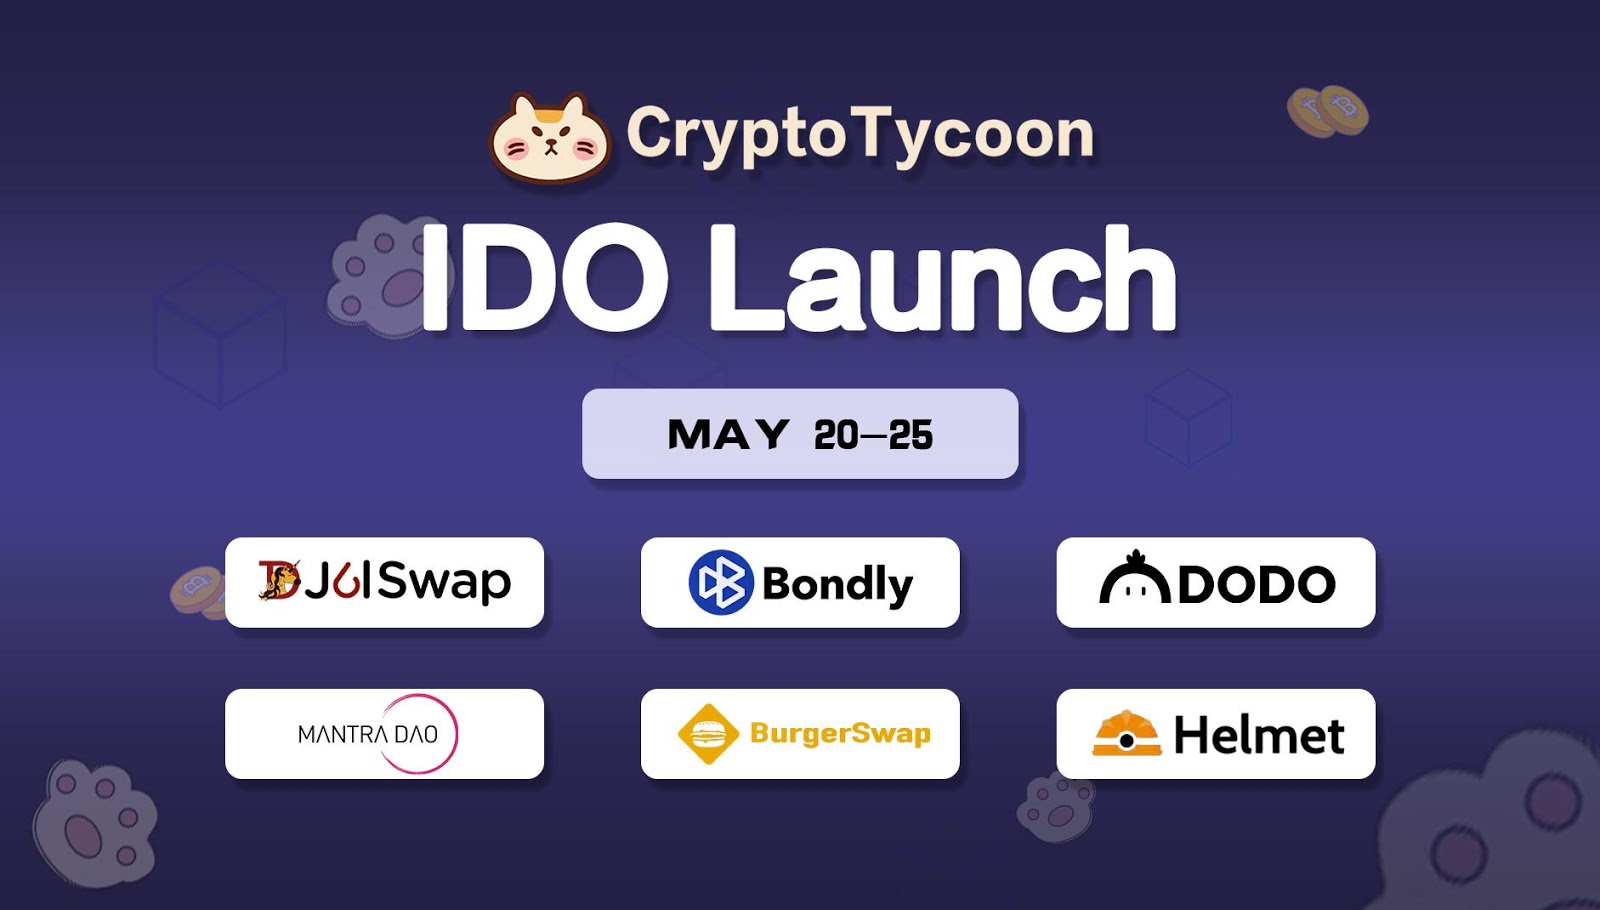 CryptoTycoon Will Launch its IDO From May 20th to 25th